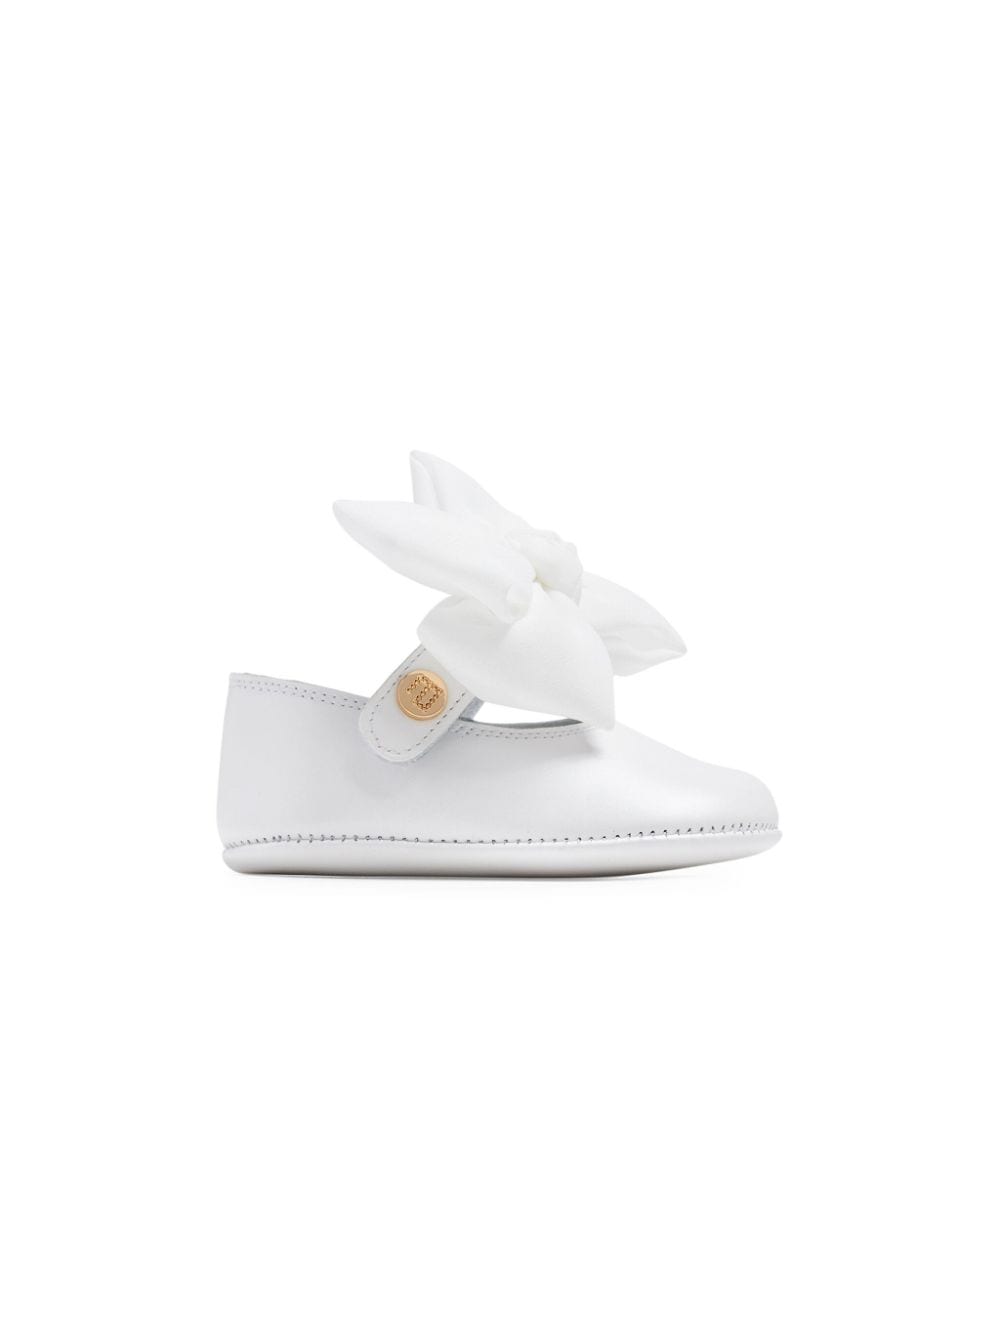 ANDANINES bow-detail leather ballerina shoes - White von ANDANINES